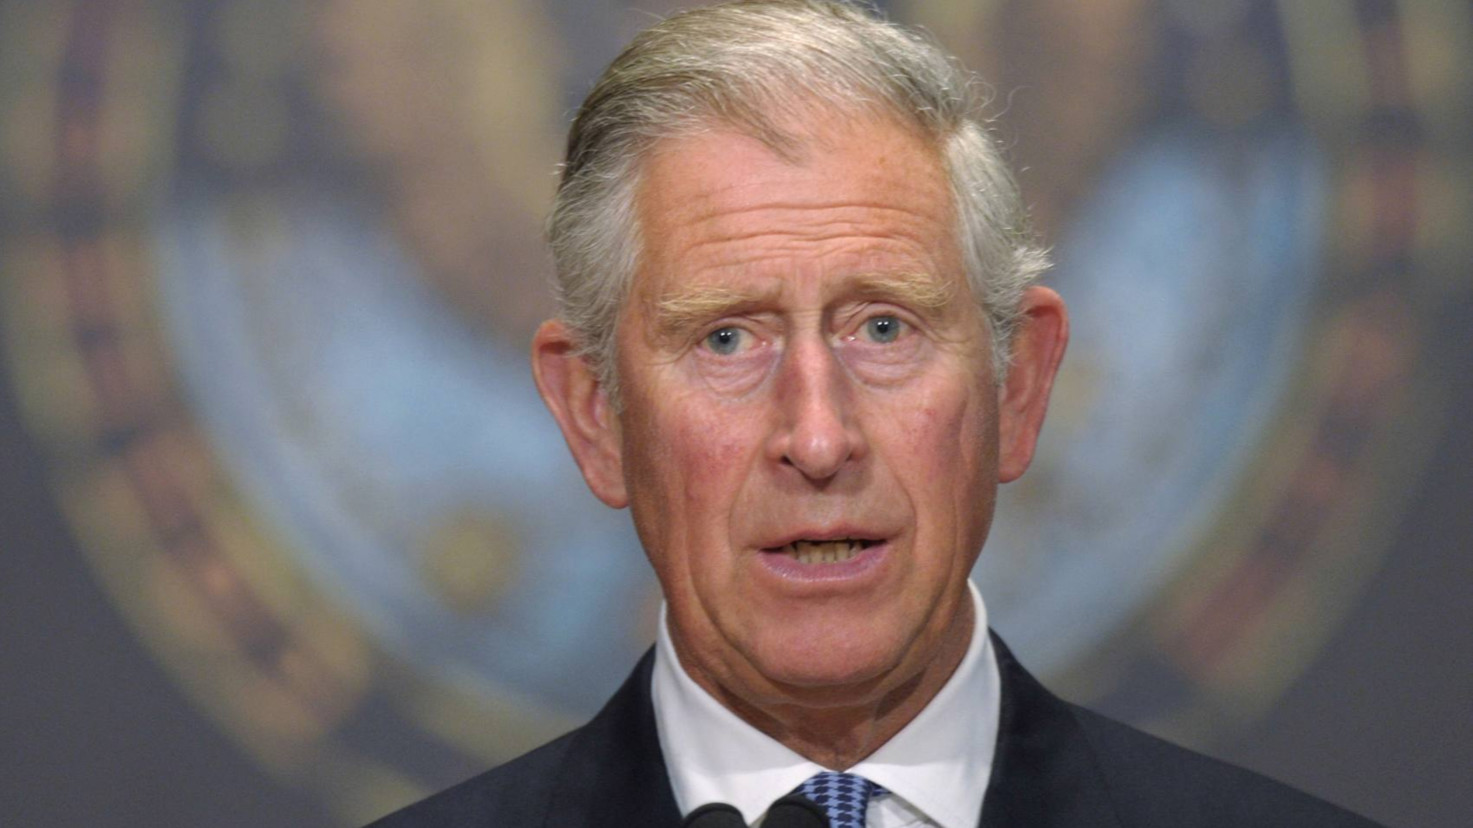 Prince Charles says private funds should finance green growth